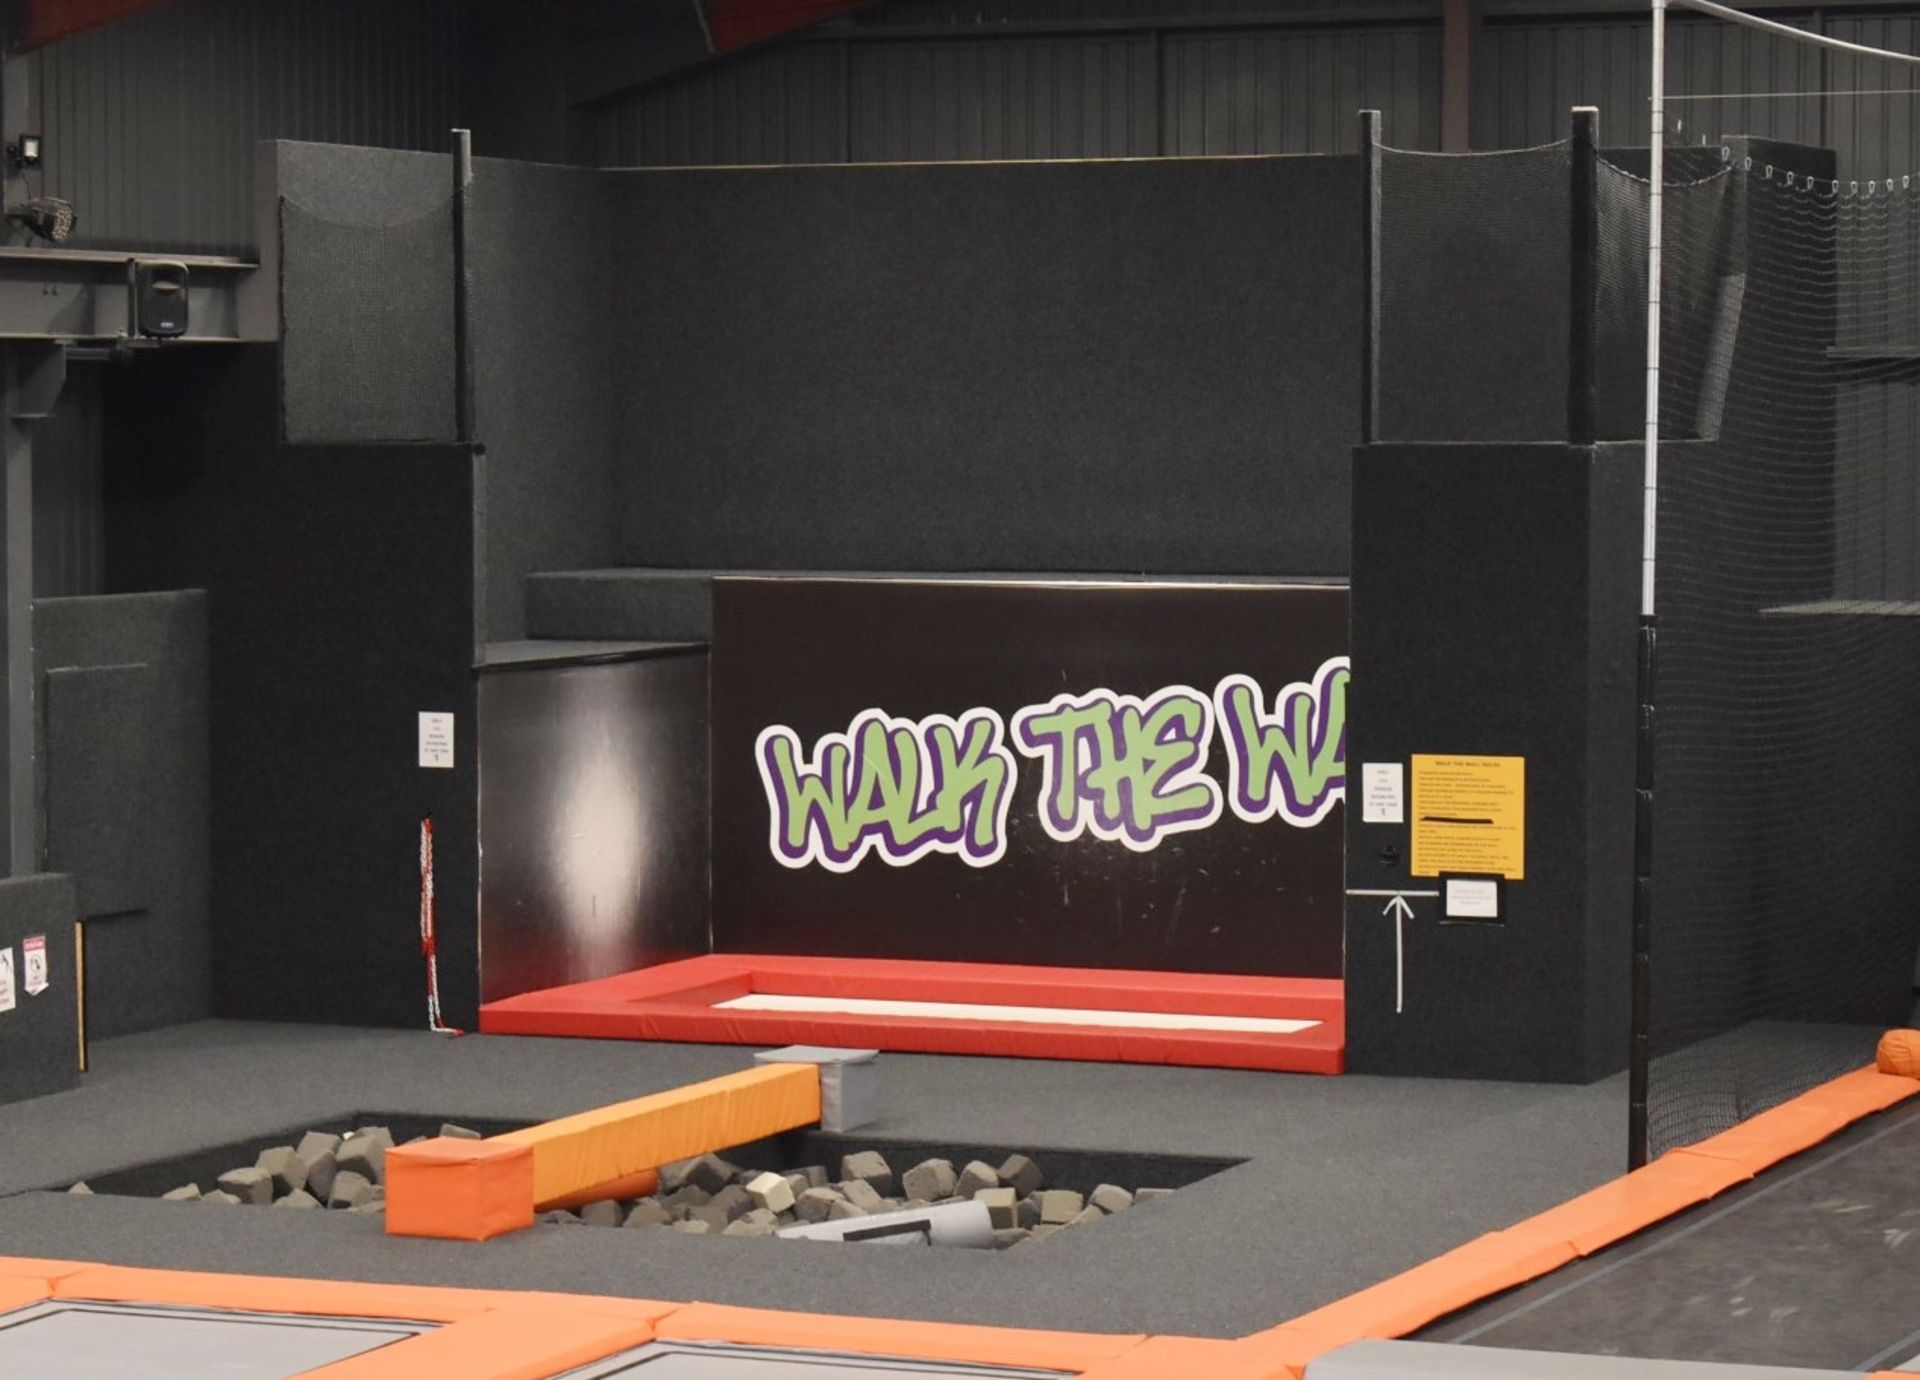 1 x Large Trampoline Park - Disassembled - Includes Dodgeball Arena And Jump Tower - CL766  - - Image 82 of 99